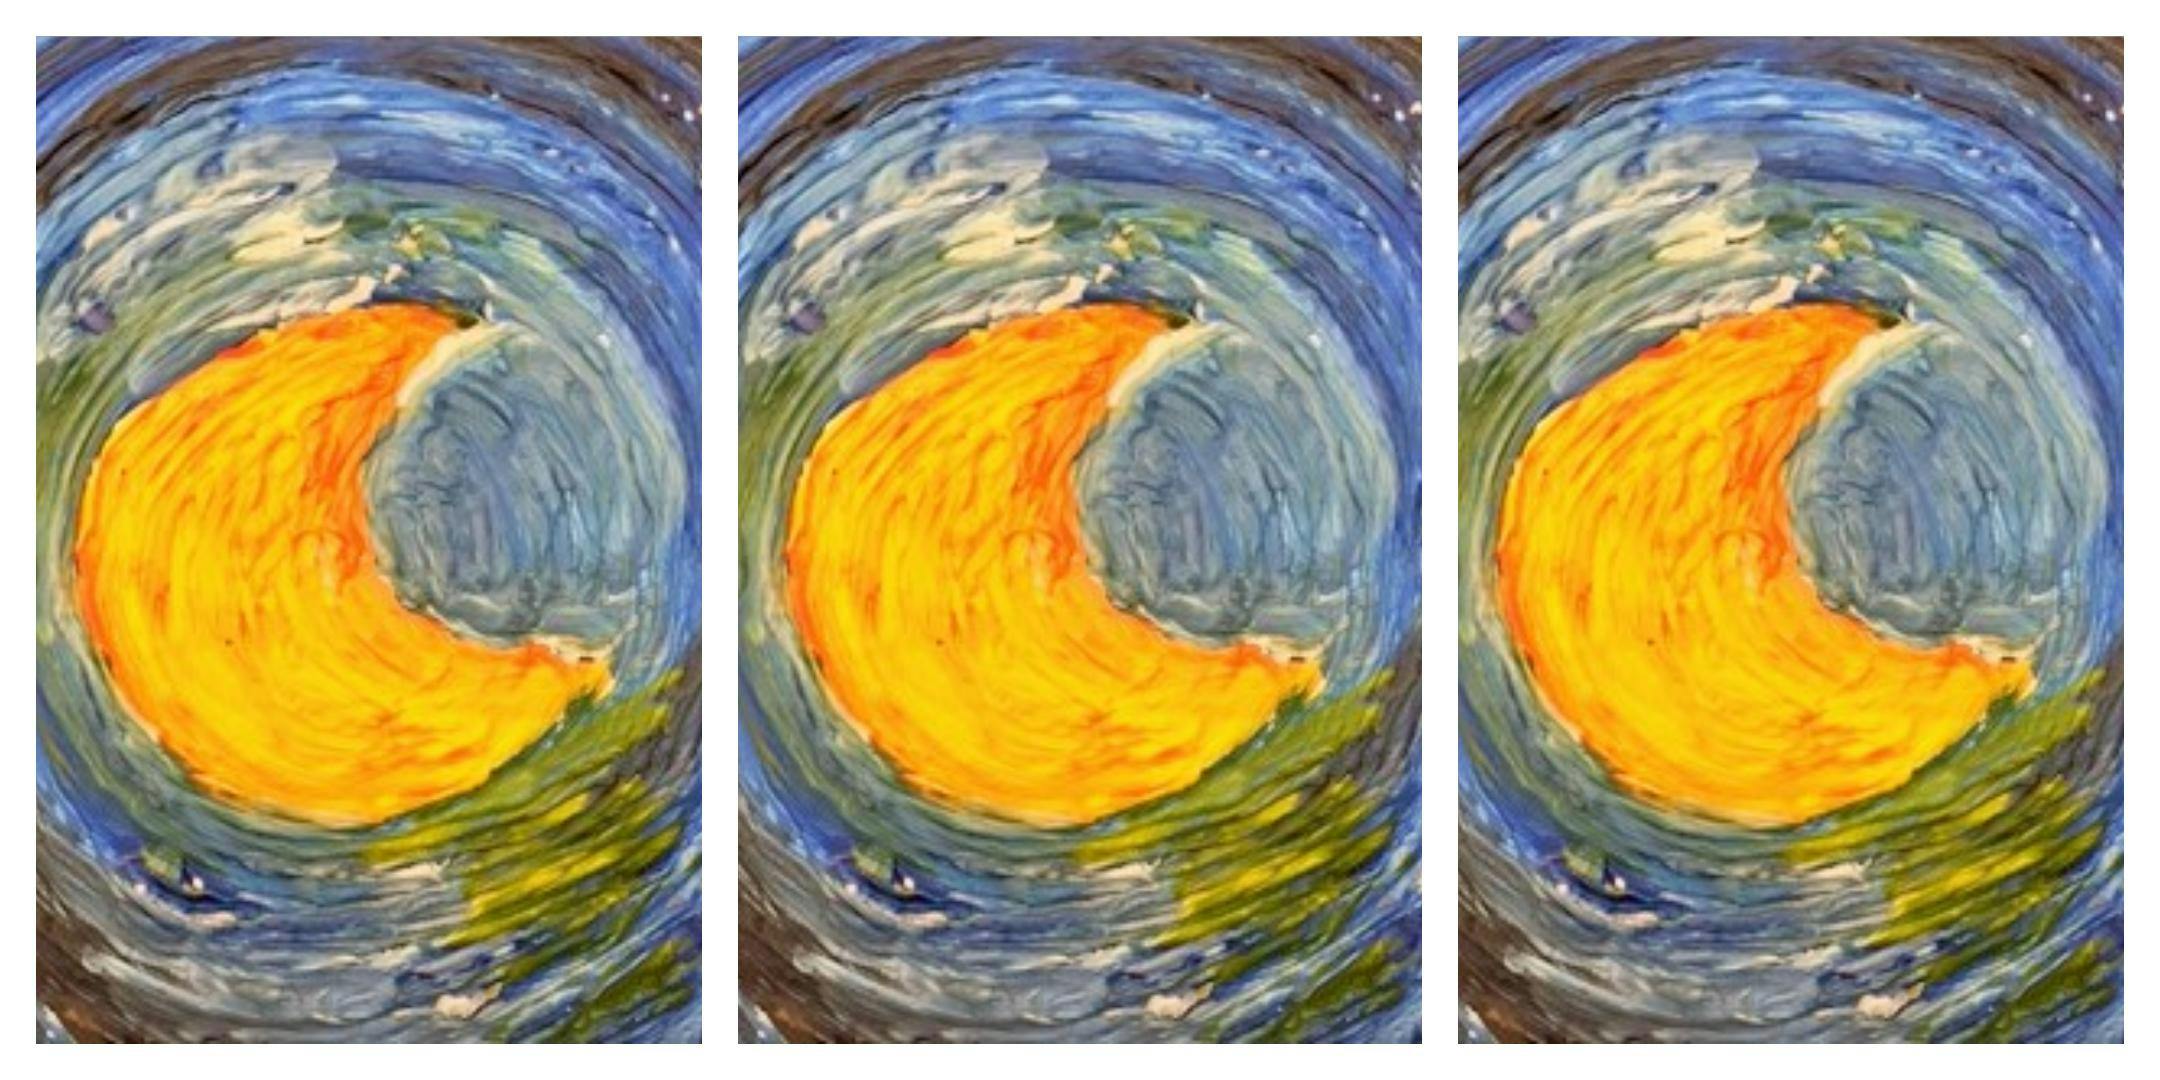 FALL SPECIAL-50% OFF! Masters in the Morning- Van Gogh Up Close (5-12 Years)